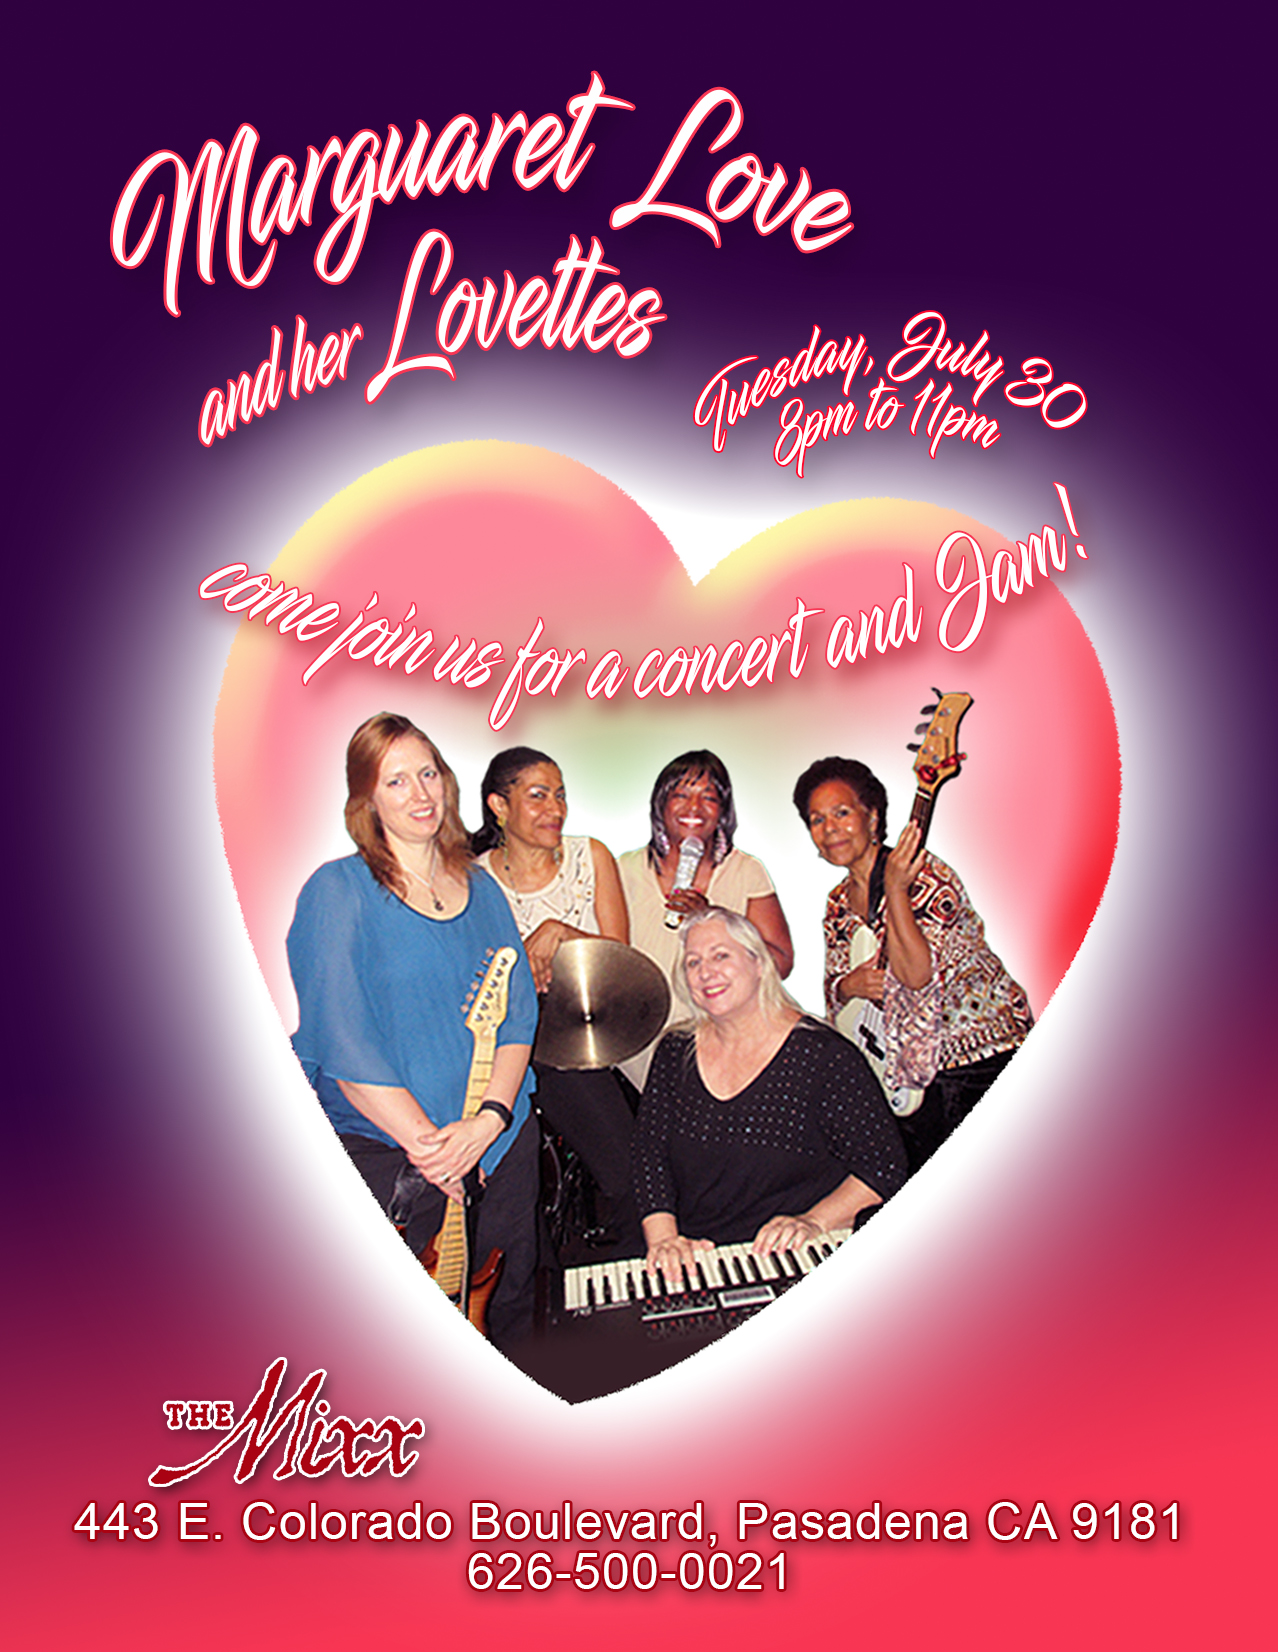 You are currently viewing Tuesday Blues jam with Marguaret Love & The Lovettes